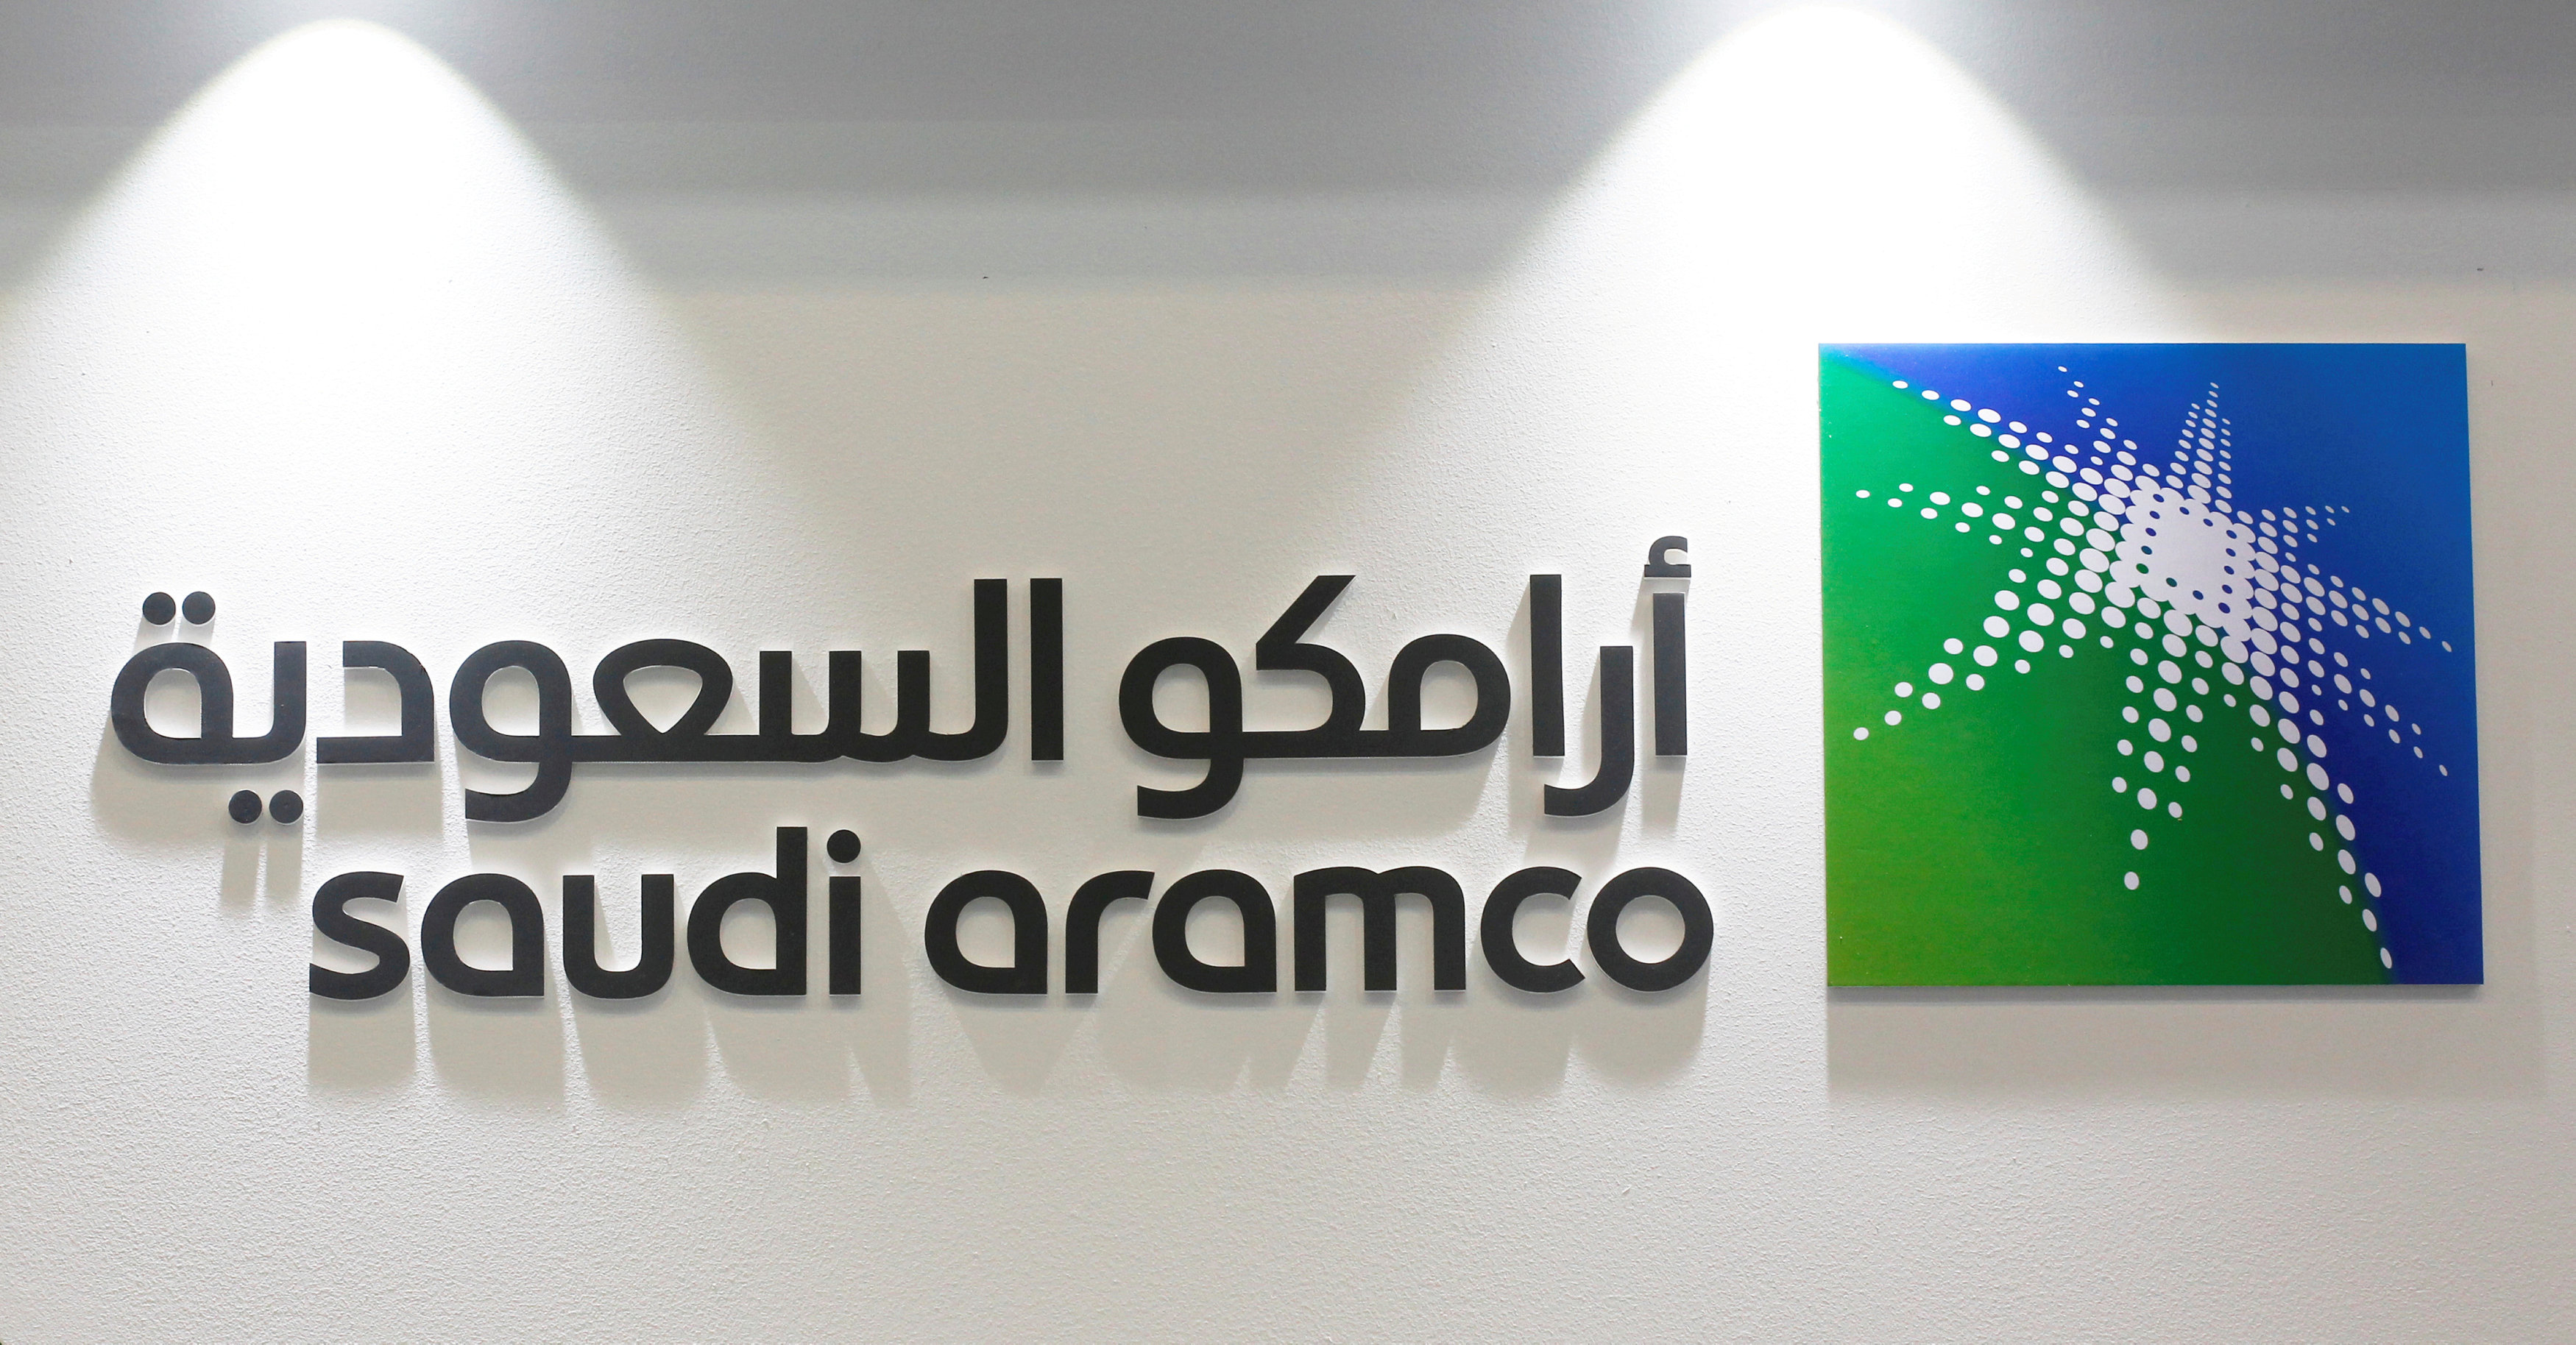 Can invest in Saudi Aramco share sale to strengthen ties: India